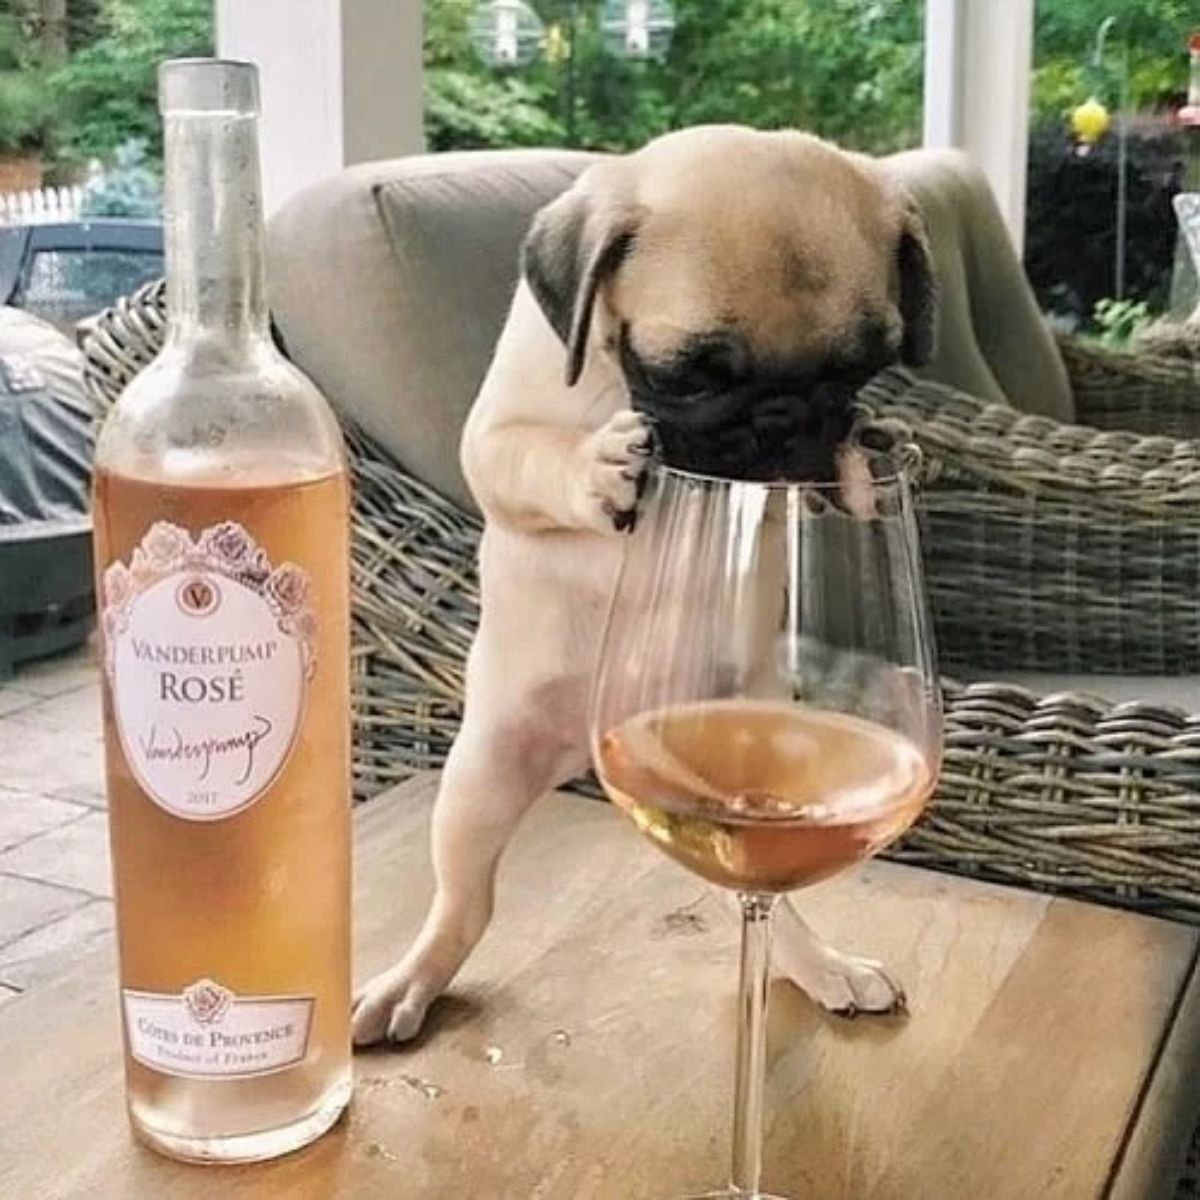 brown pug puppy standing on a wooden table leaning into a glass of rose next to a bottle of rose